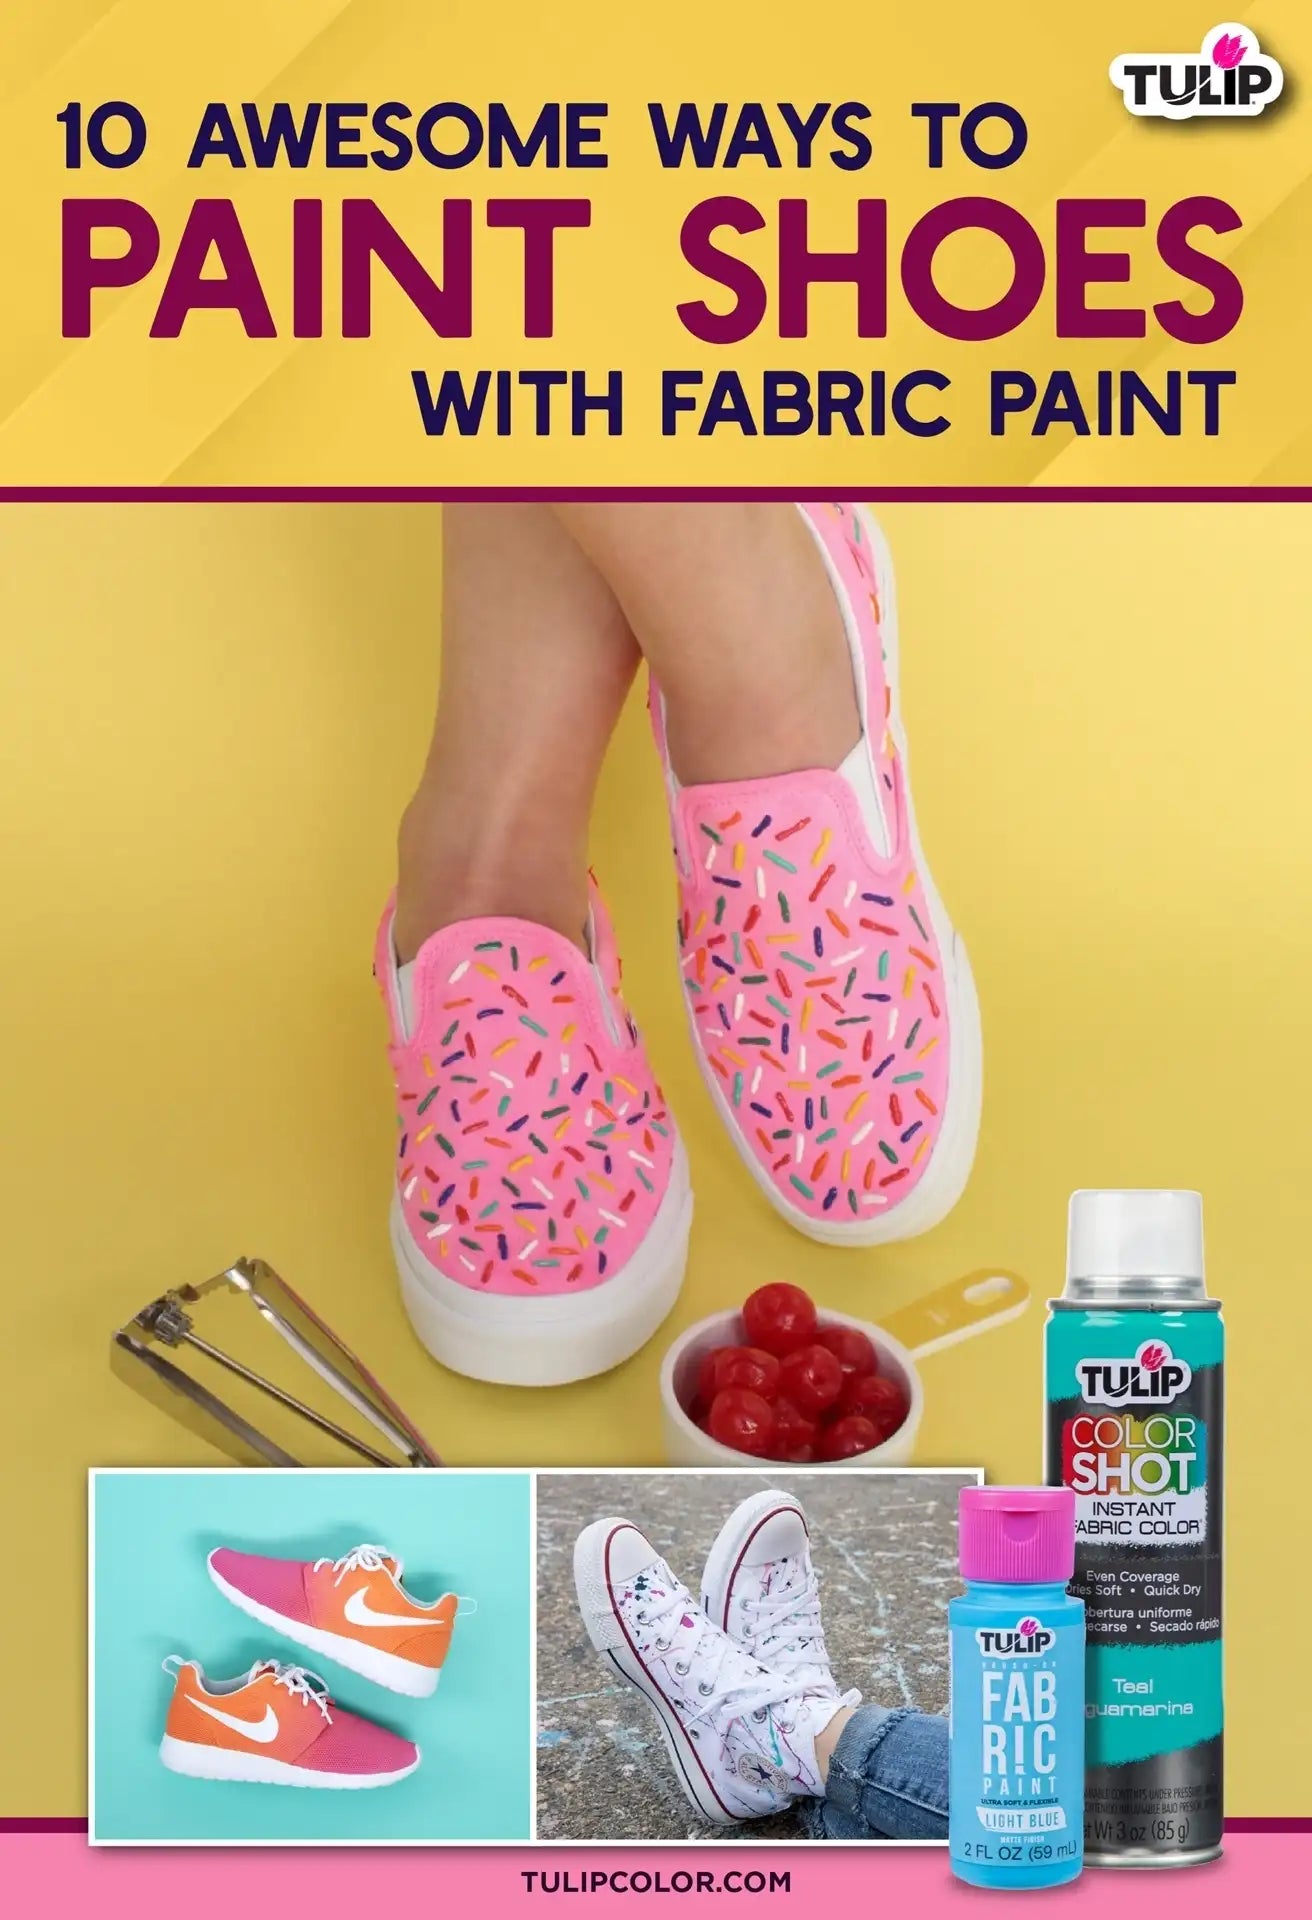 Fabric Paint – Tulip Color Crafts